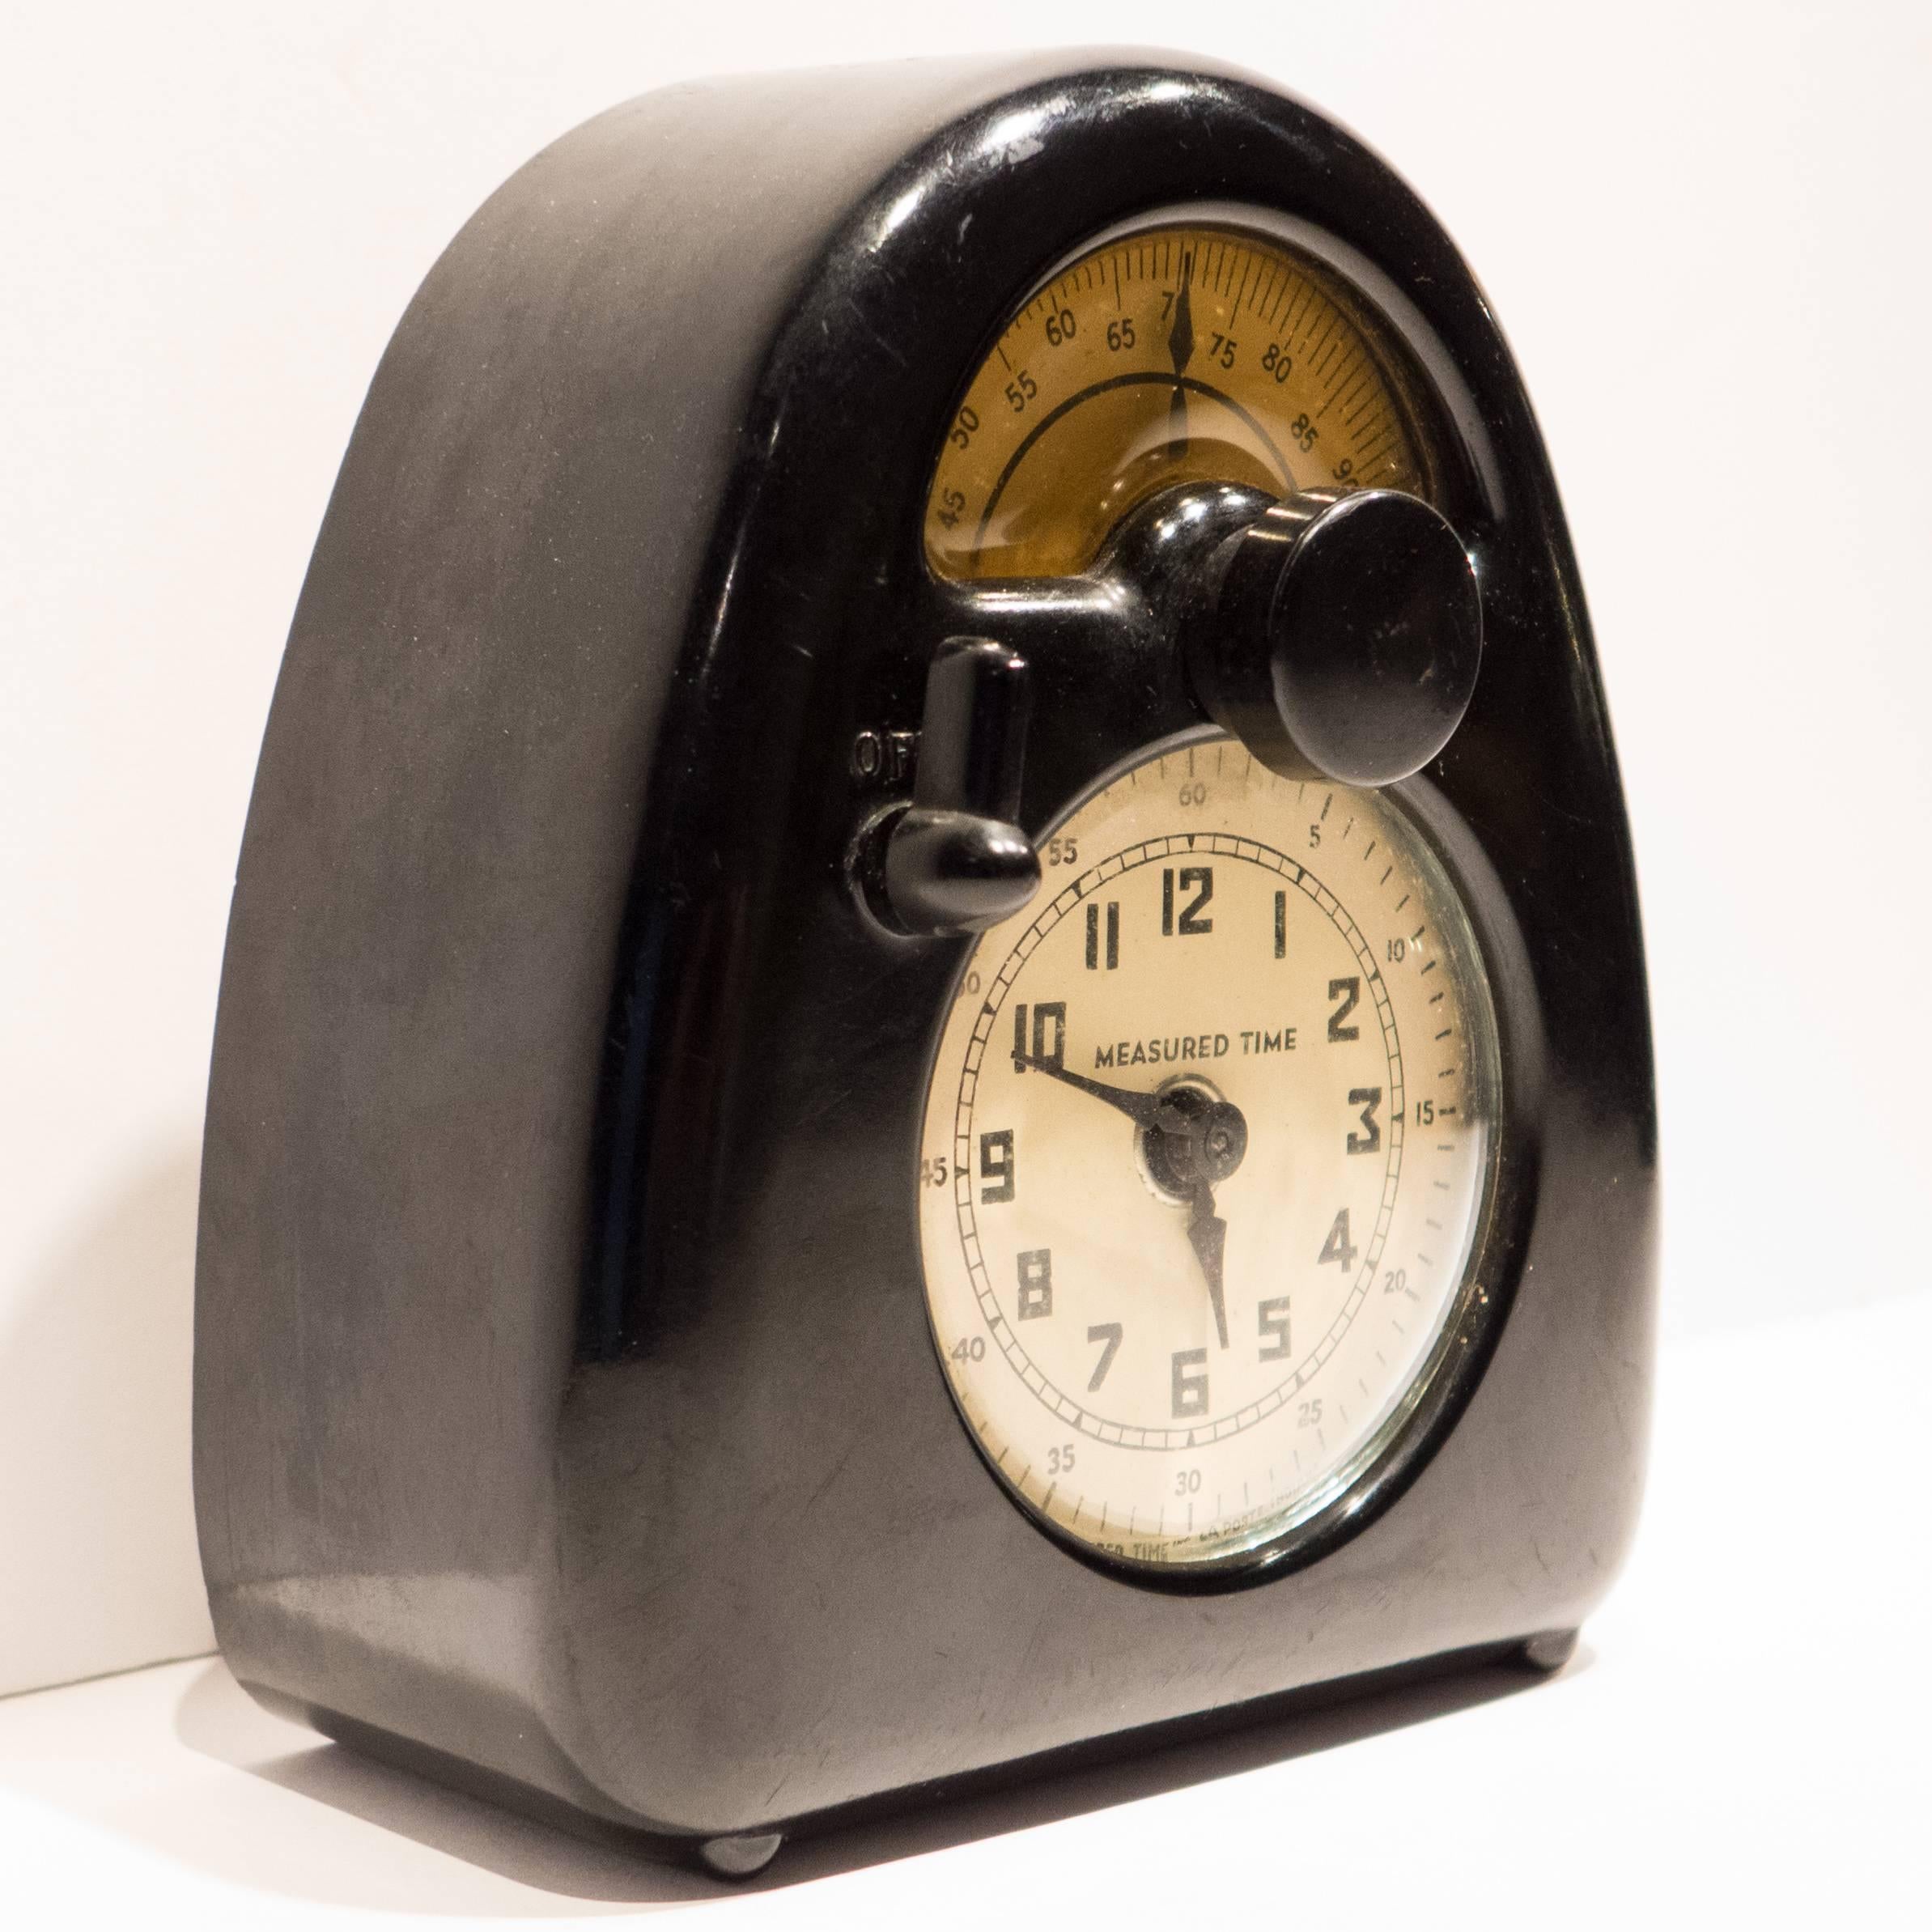 Measured time clock of bakelite, glass, metal, plastic, and printed paper, produced by the Stevenson Mfg Co, c. 1932. A wind-up model in fine original condition. An Isamu Noguchi Machine Age design verified by the Noguchi Foundation in 2014.